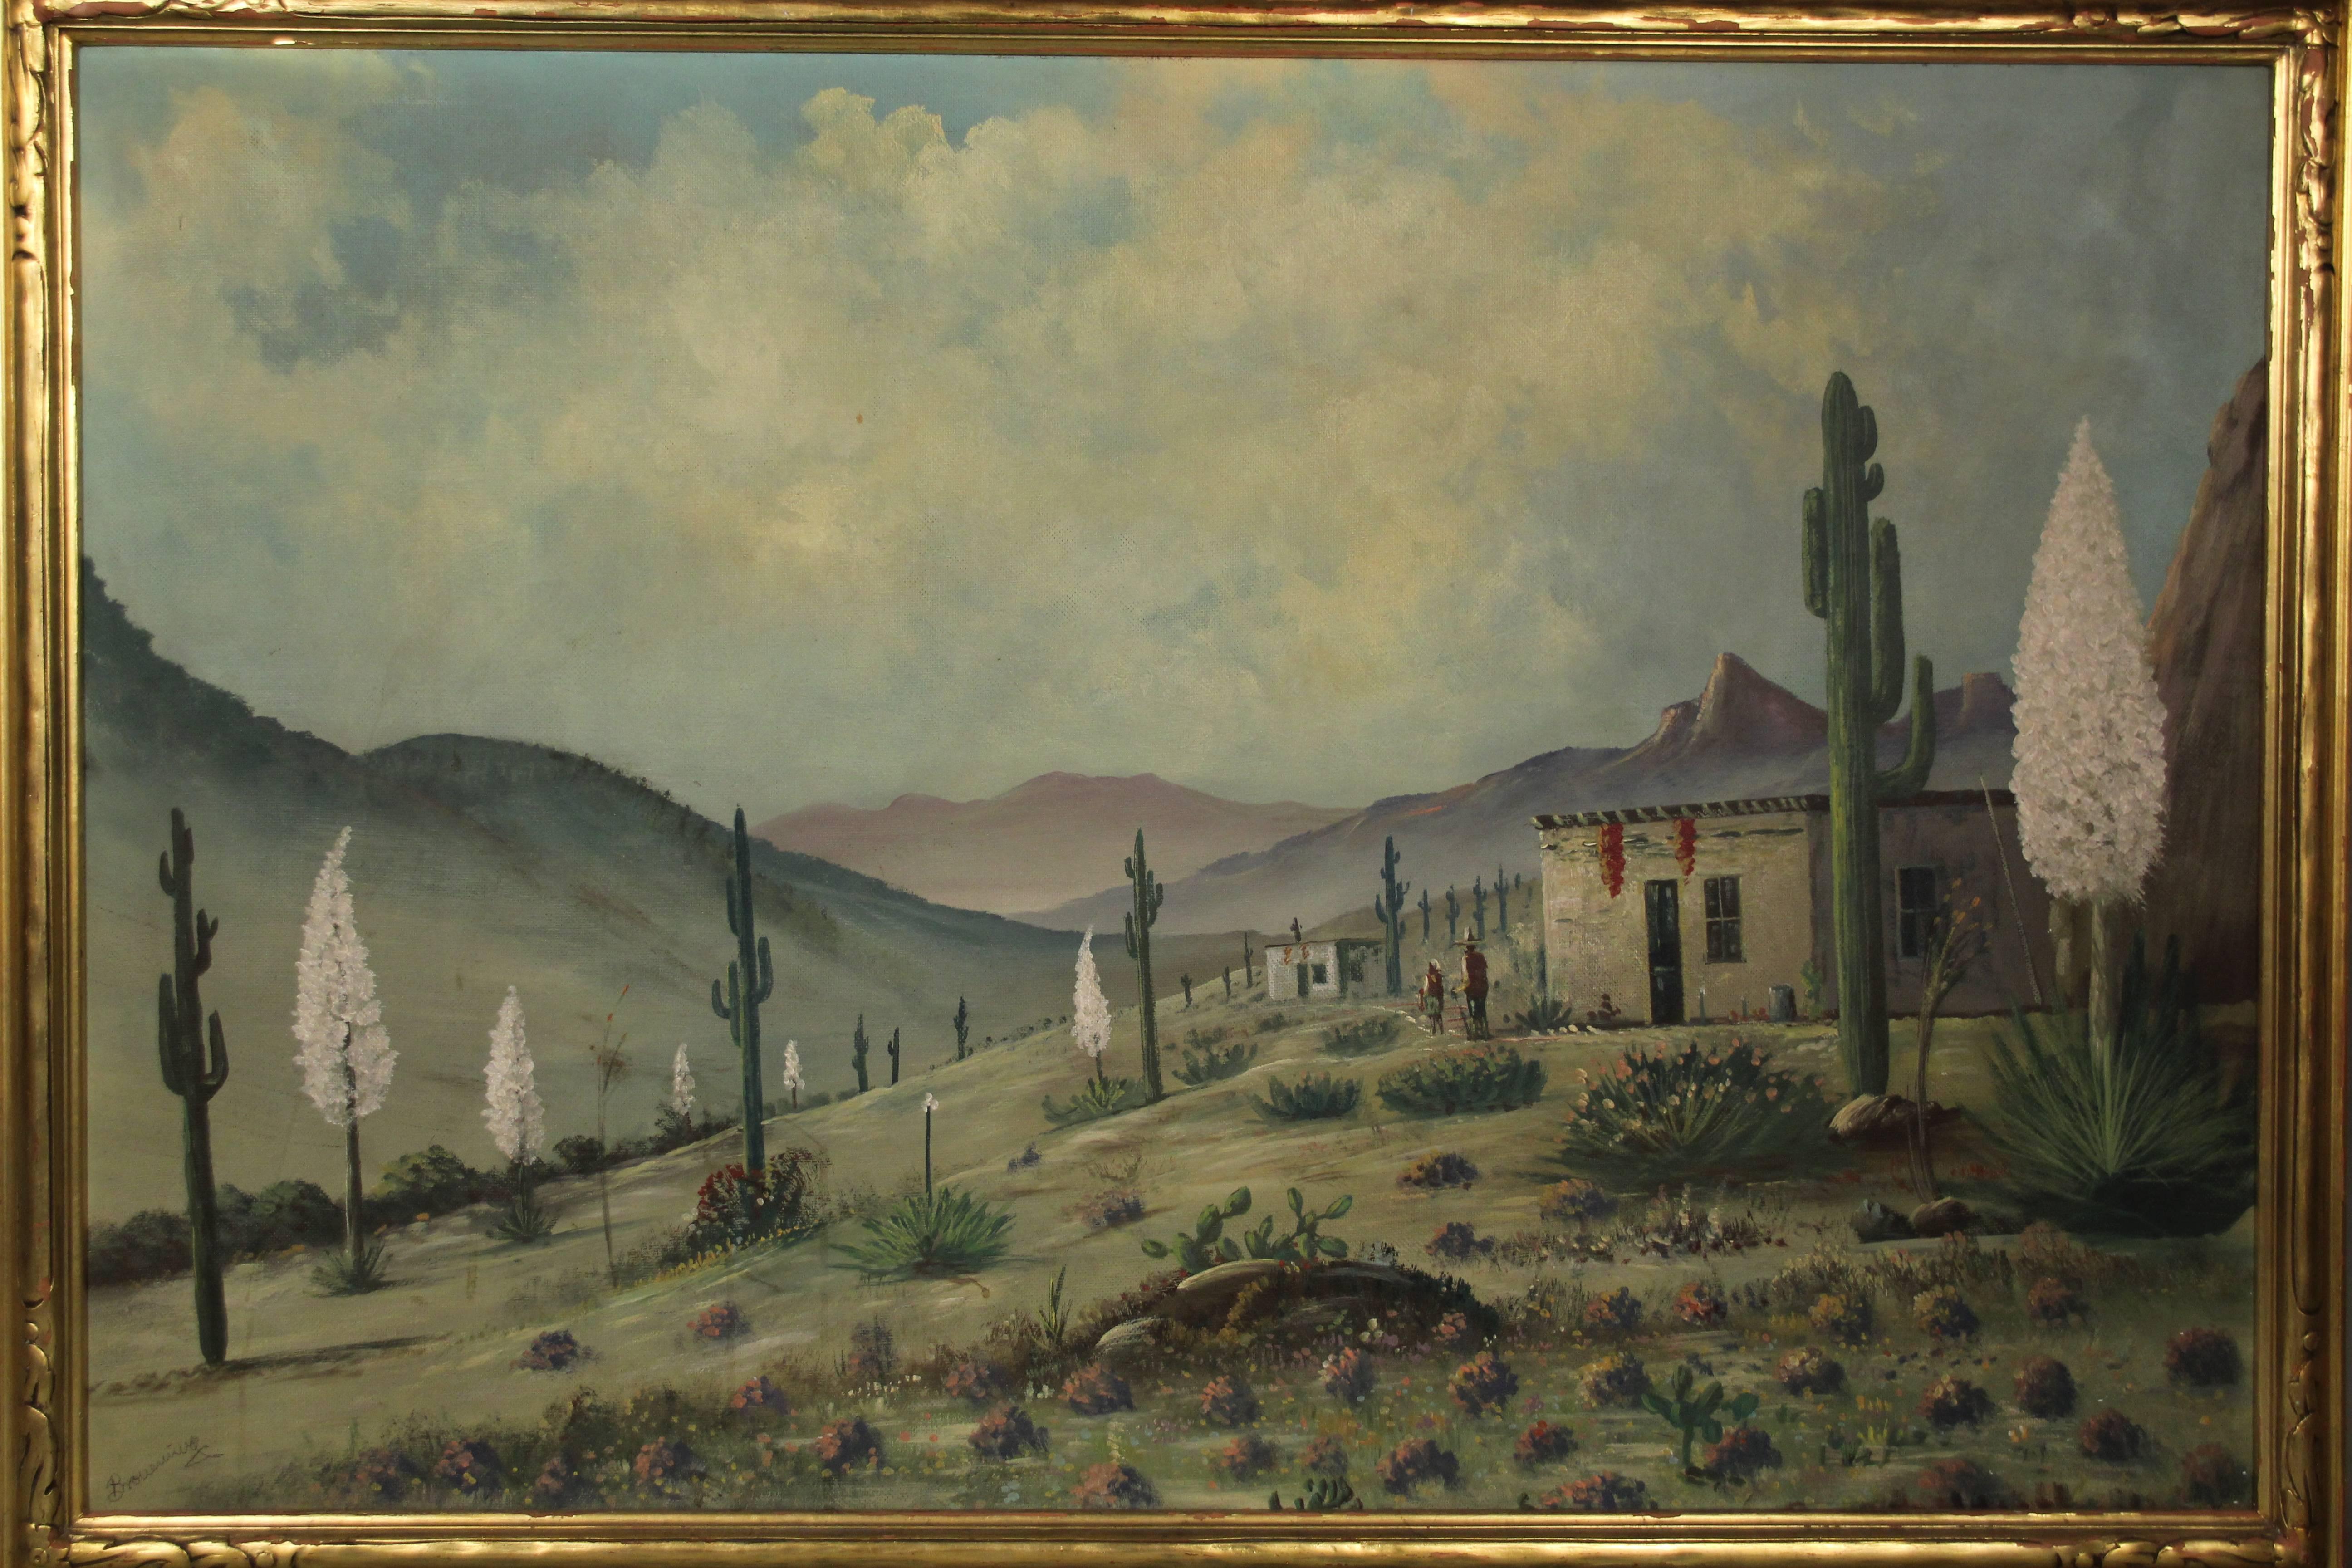 Oil painting. Folk Art painting of yuccas and cactus hillside in carved wood frame, circa 1930s.